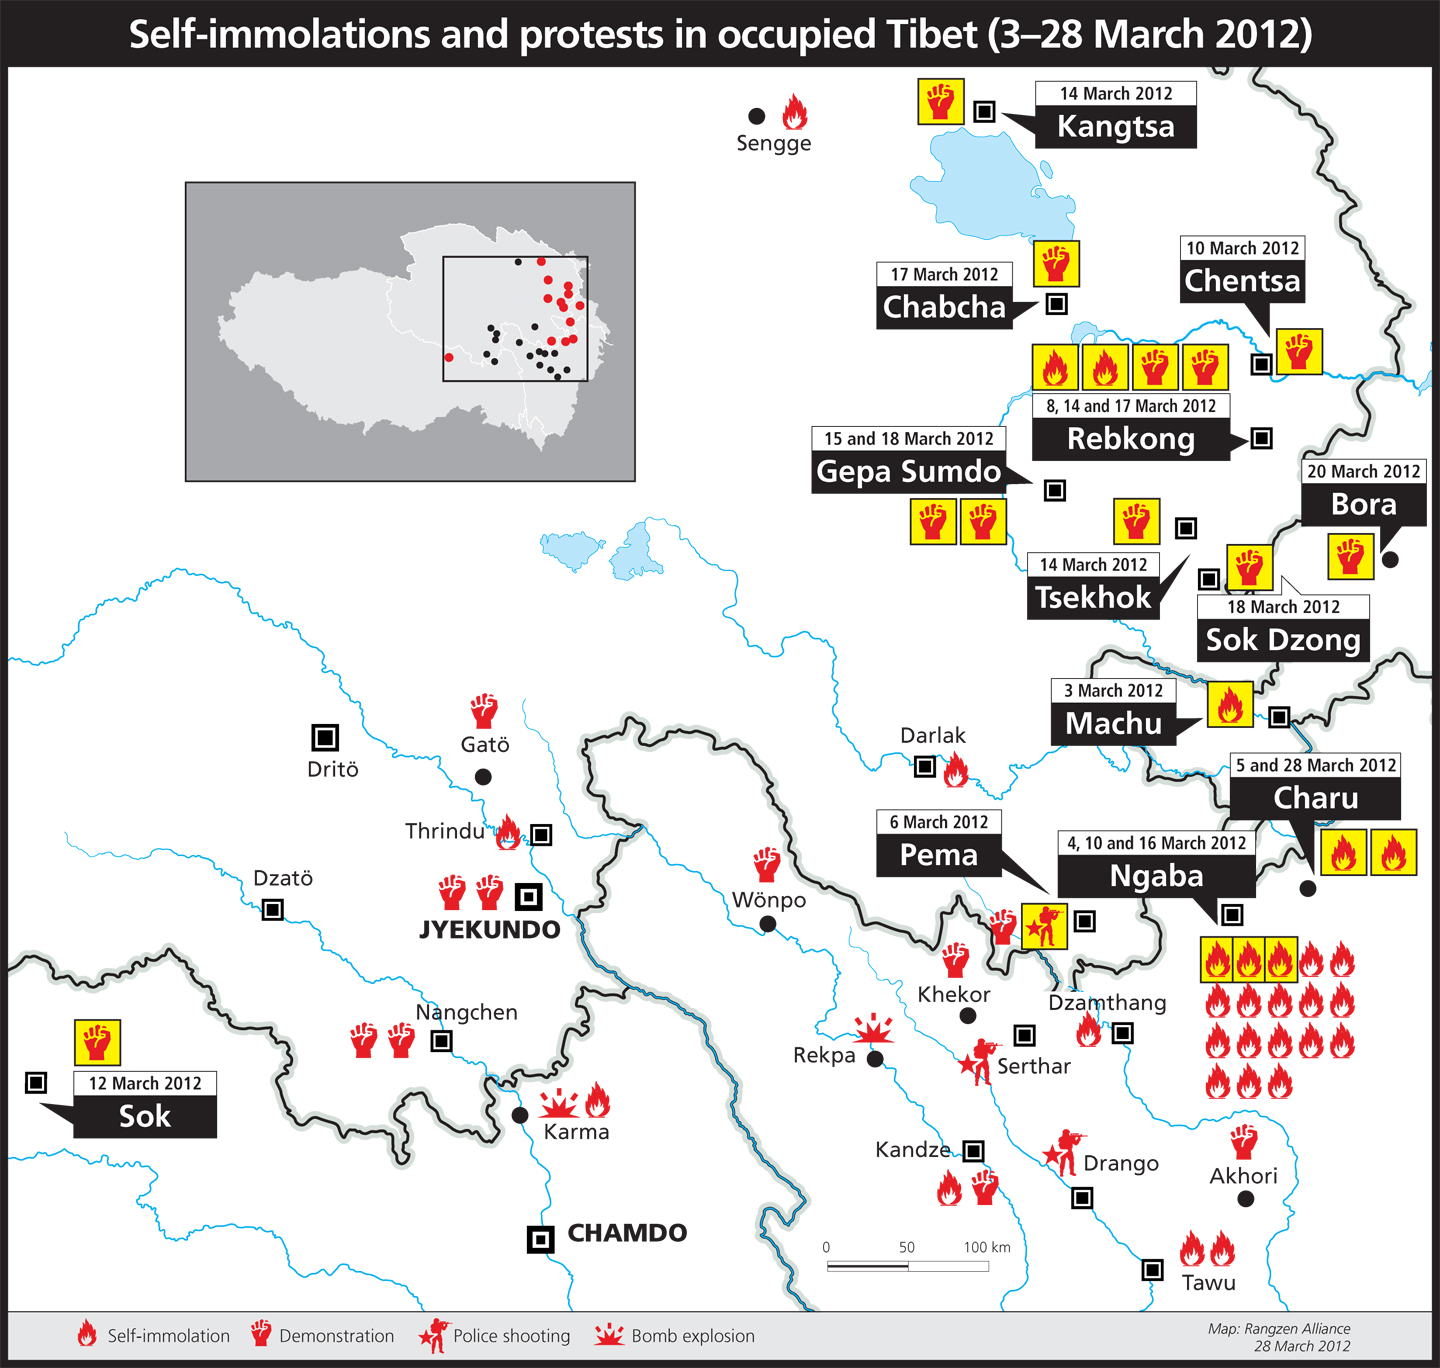 Sel-immolations and prosets in occupied Tibet (3-28 March 2012)